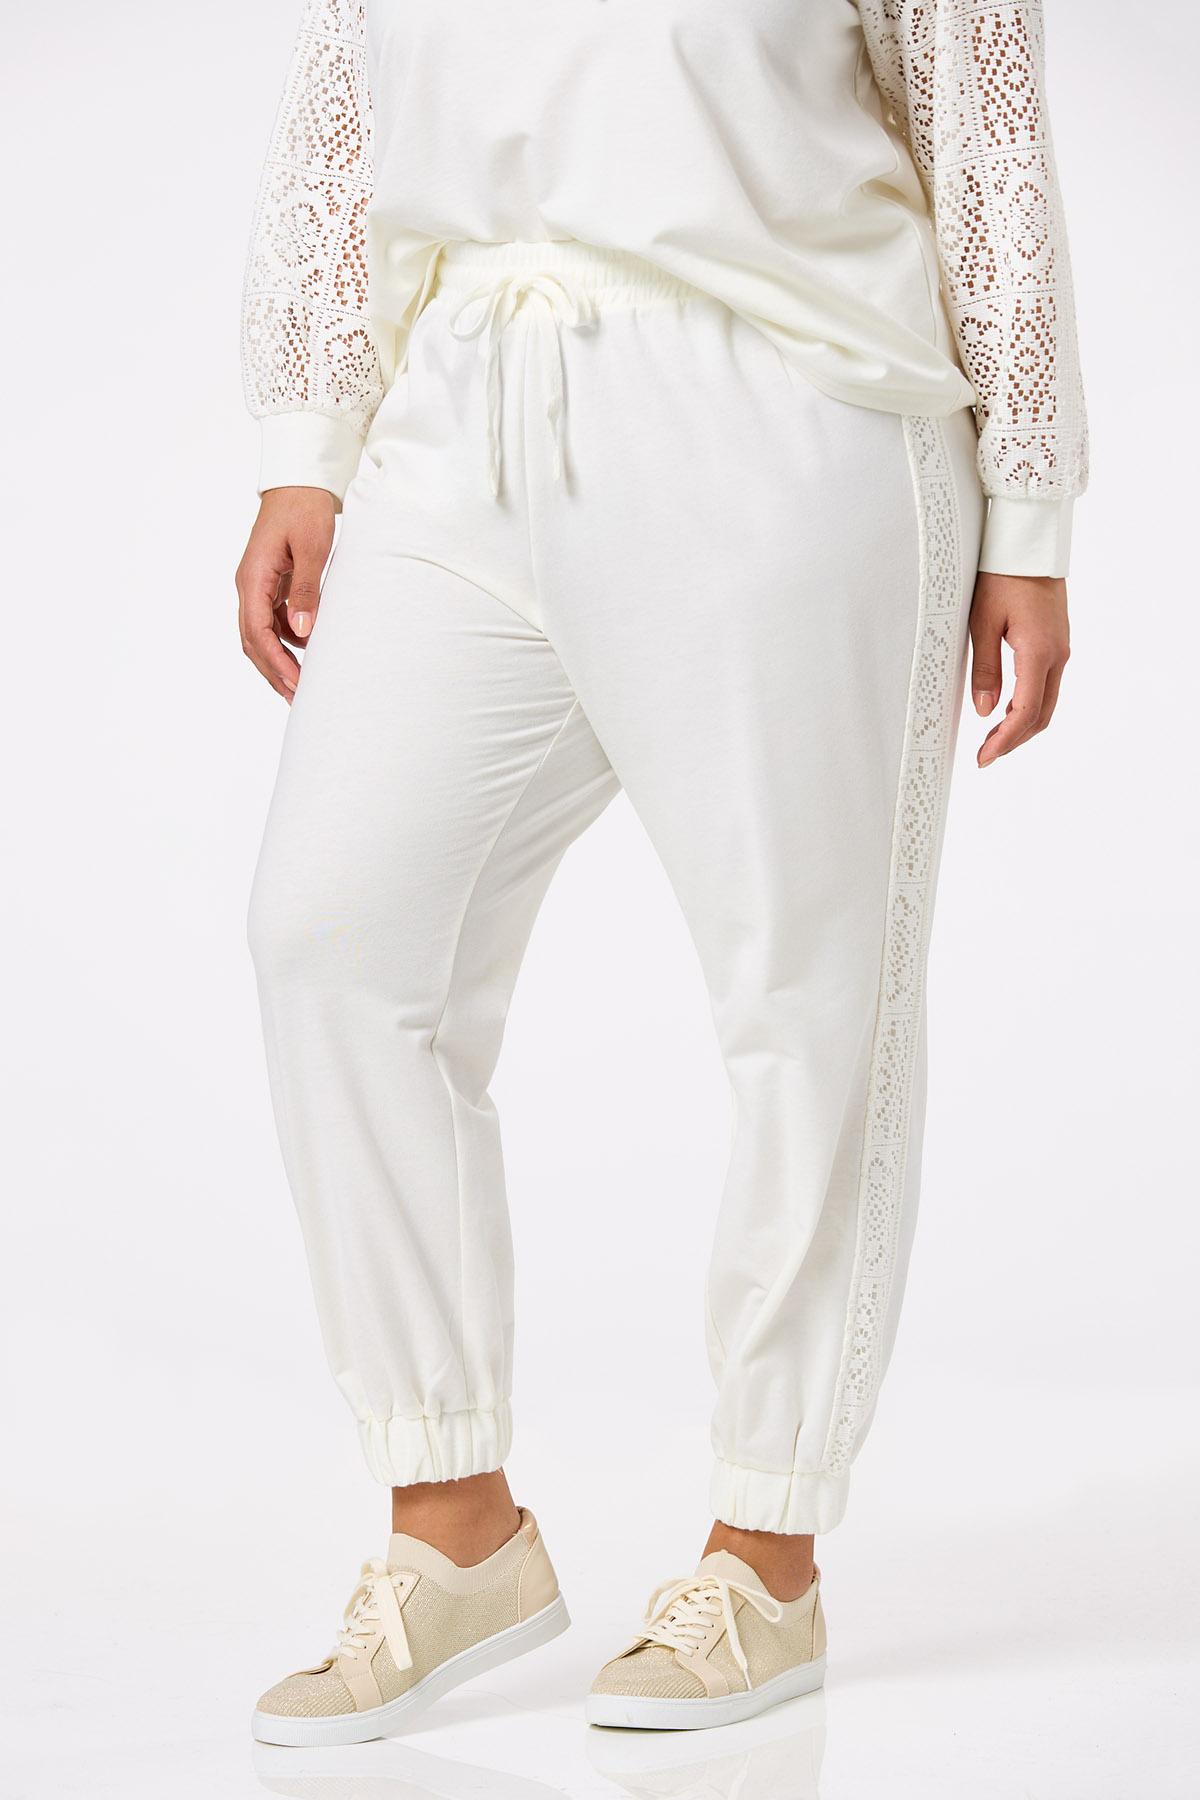 Cato Fashions  Cato Plus Size Lacy French Terry Joggers